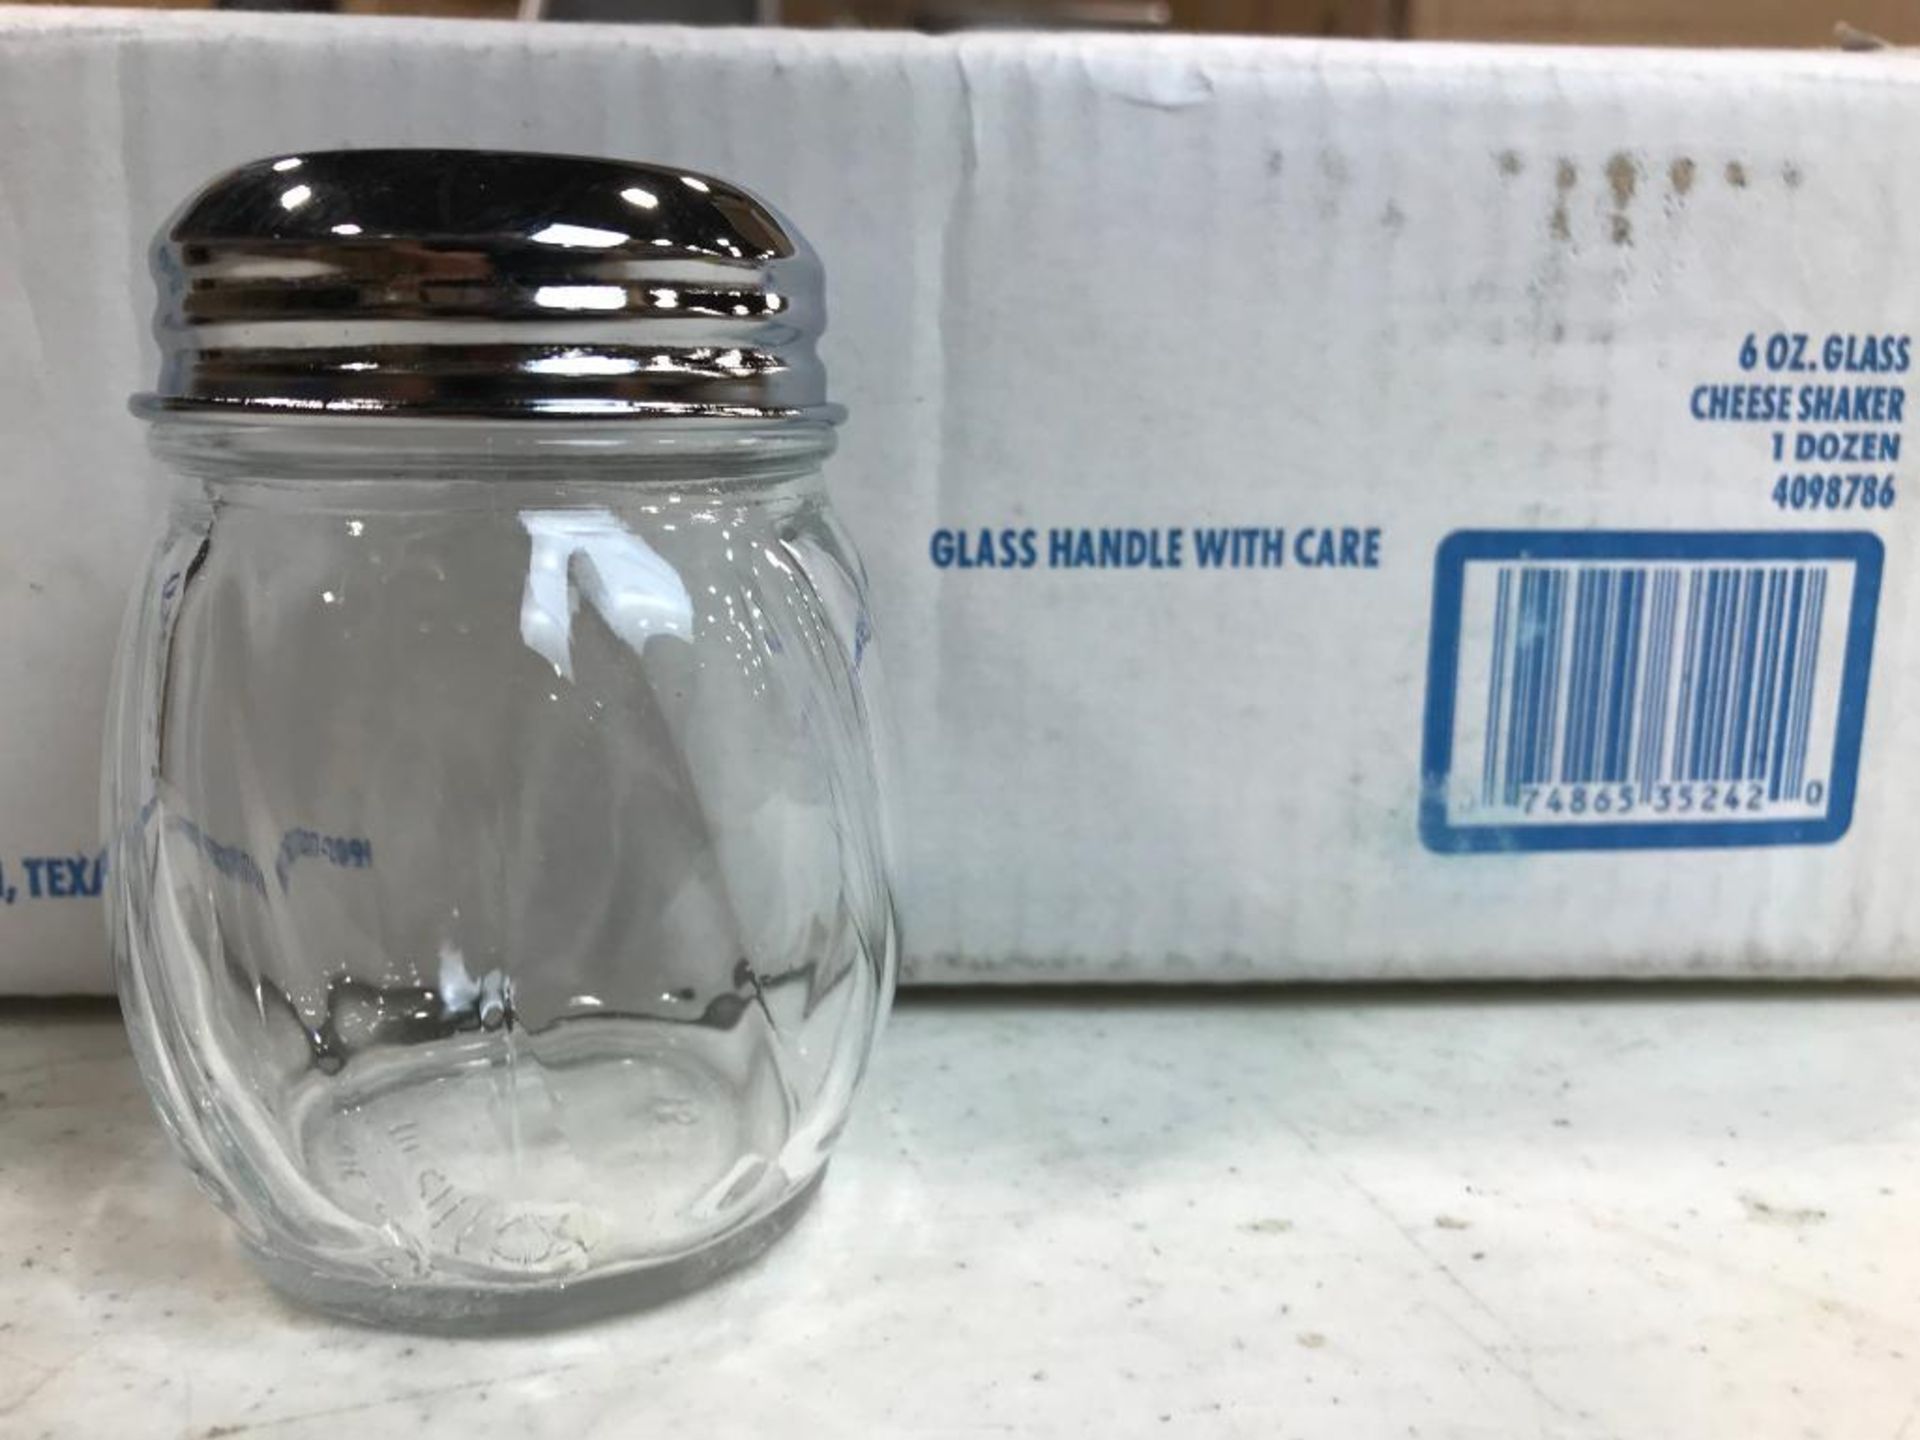 6 OZ GLASS CHEESE SHAKERS - CASE OF 12